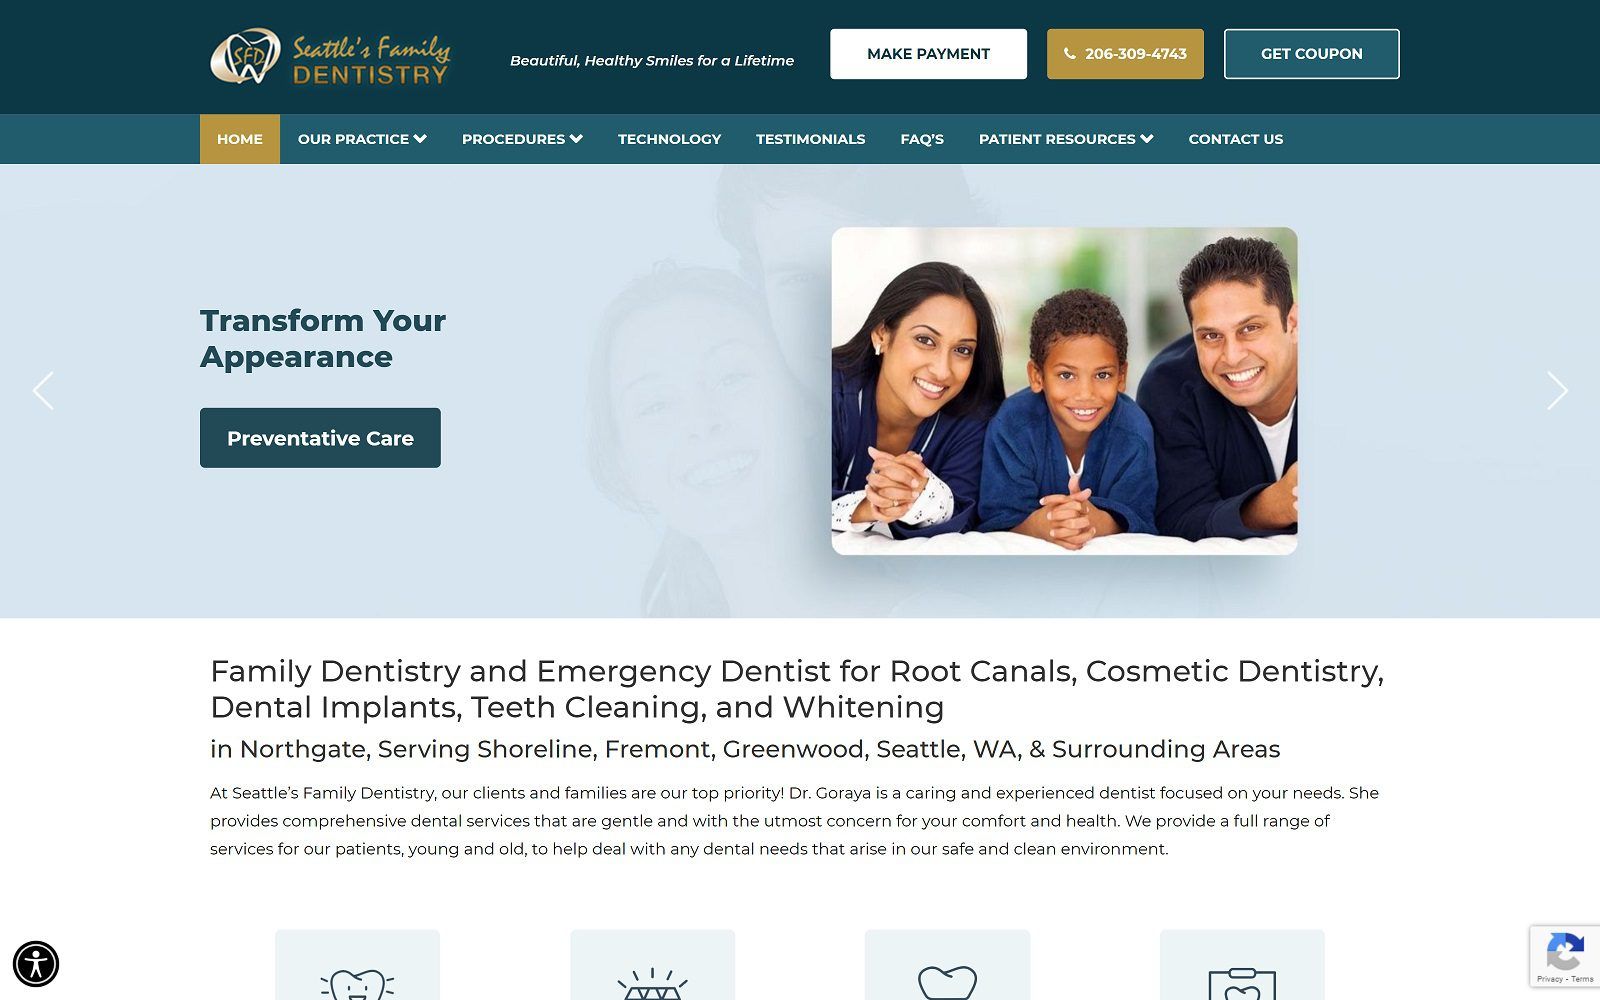 The screenshot of seattle's family dentistry website